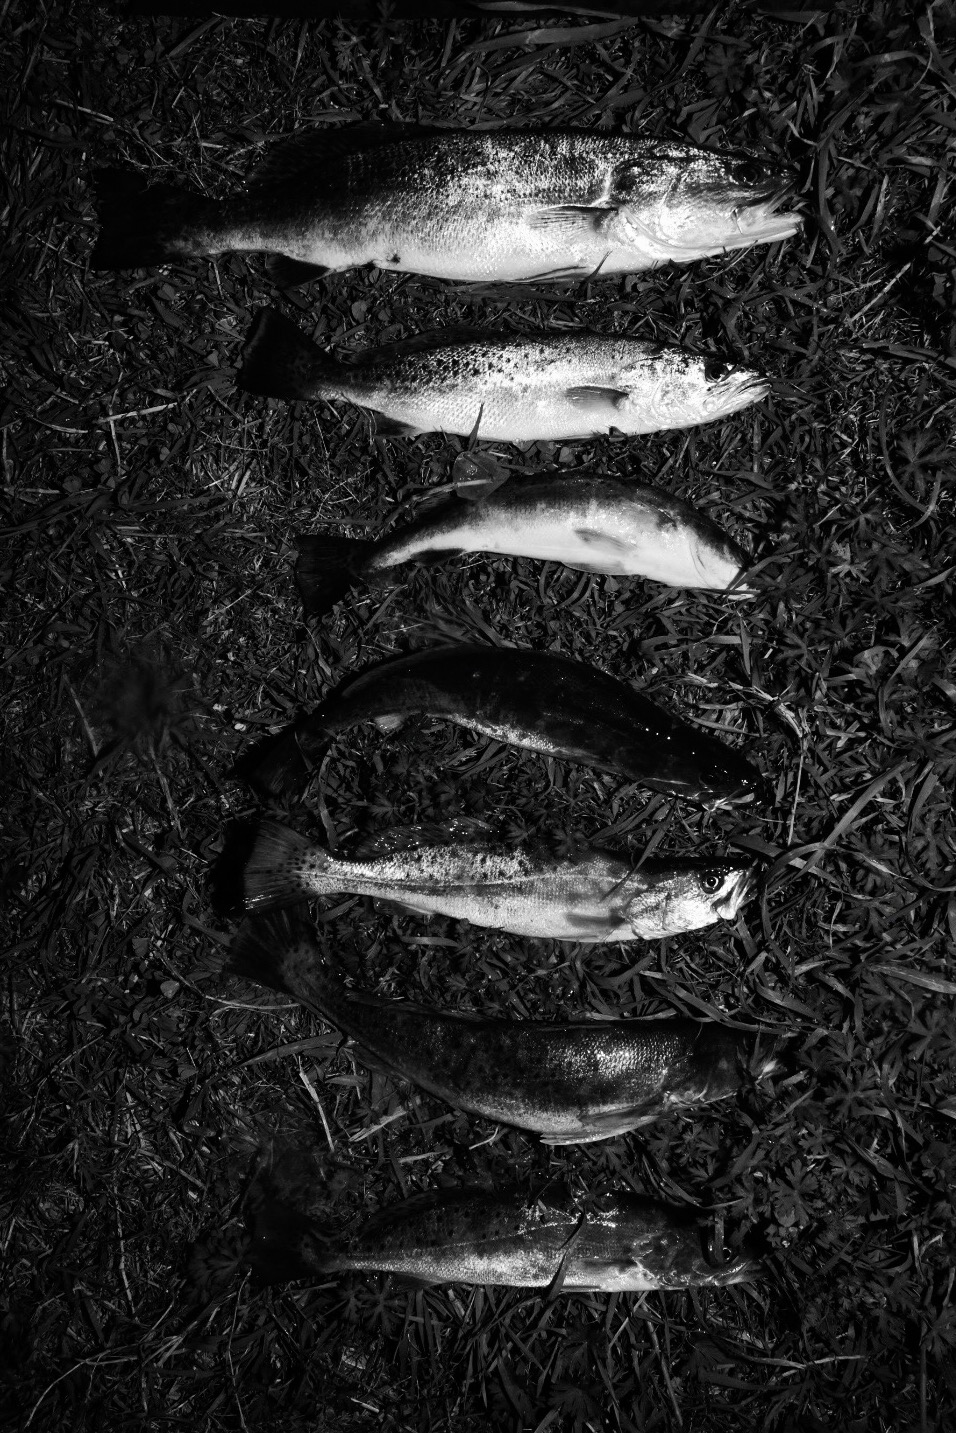 The haul for the day - all redfish were released.